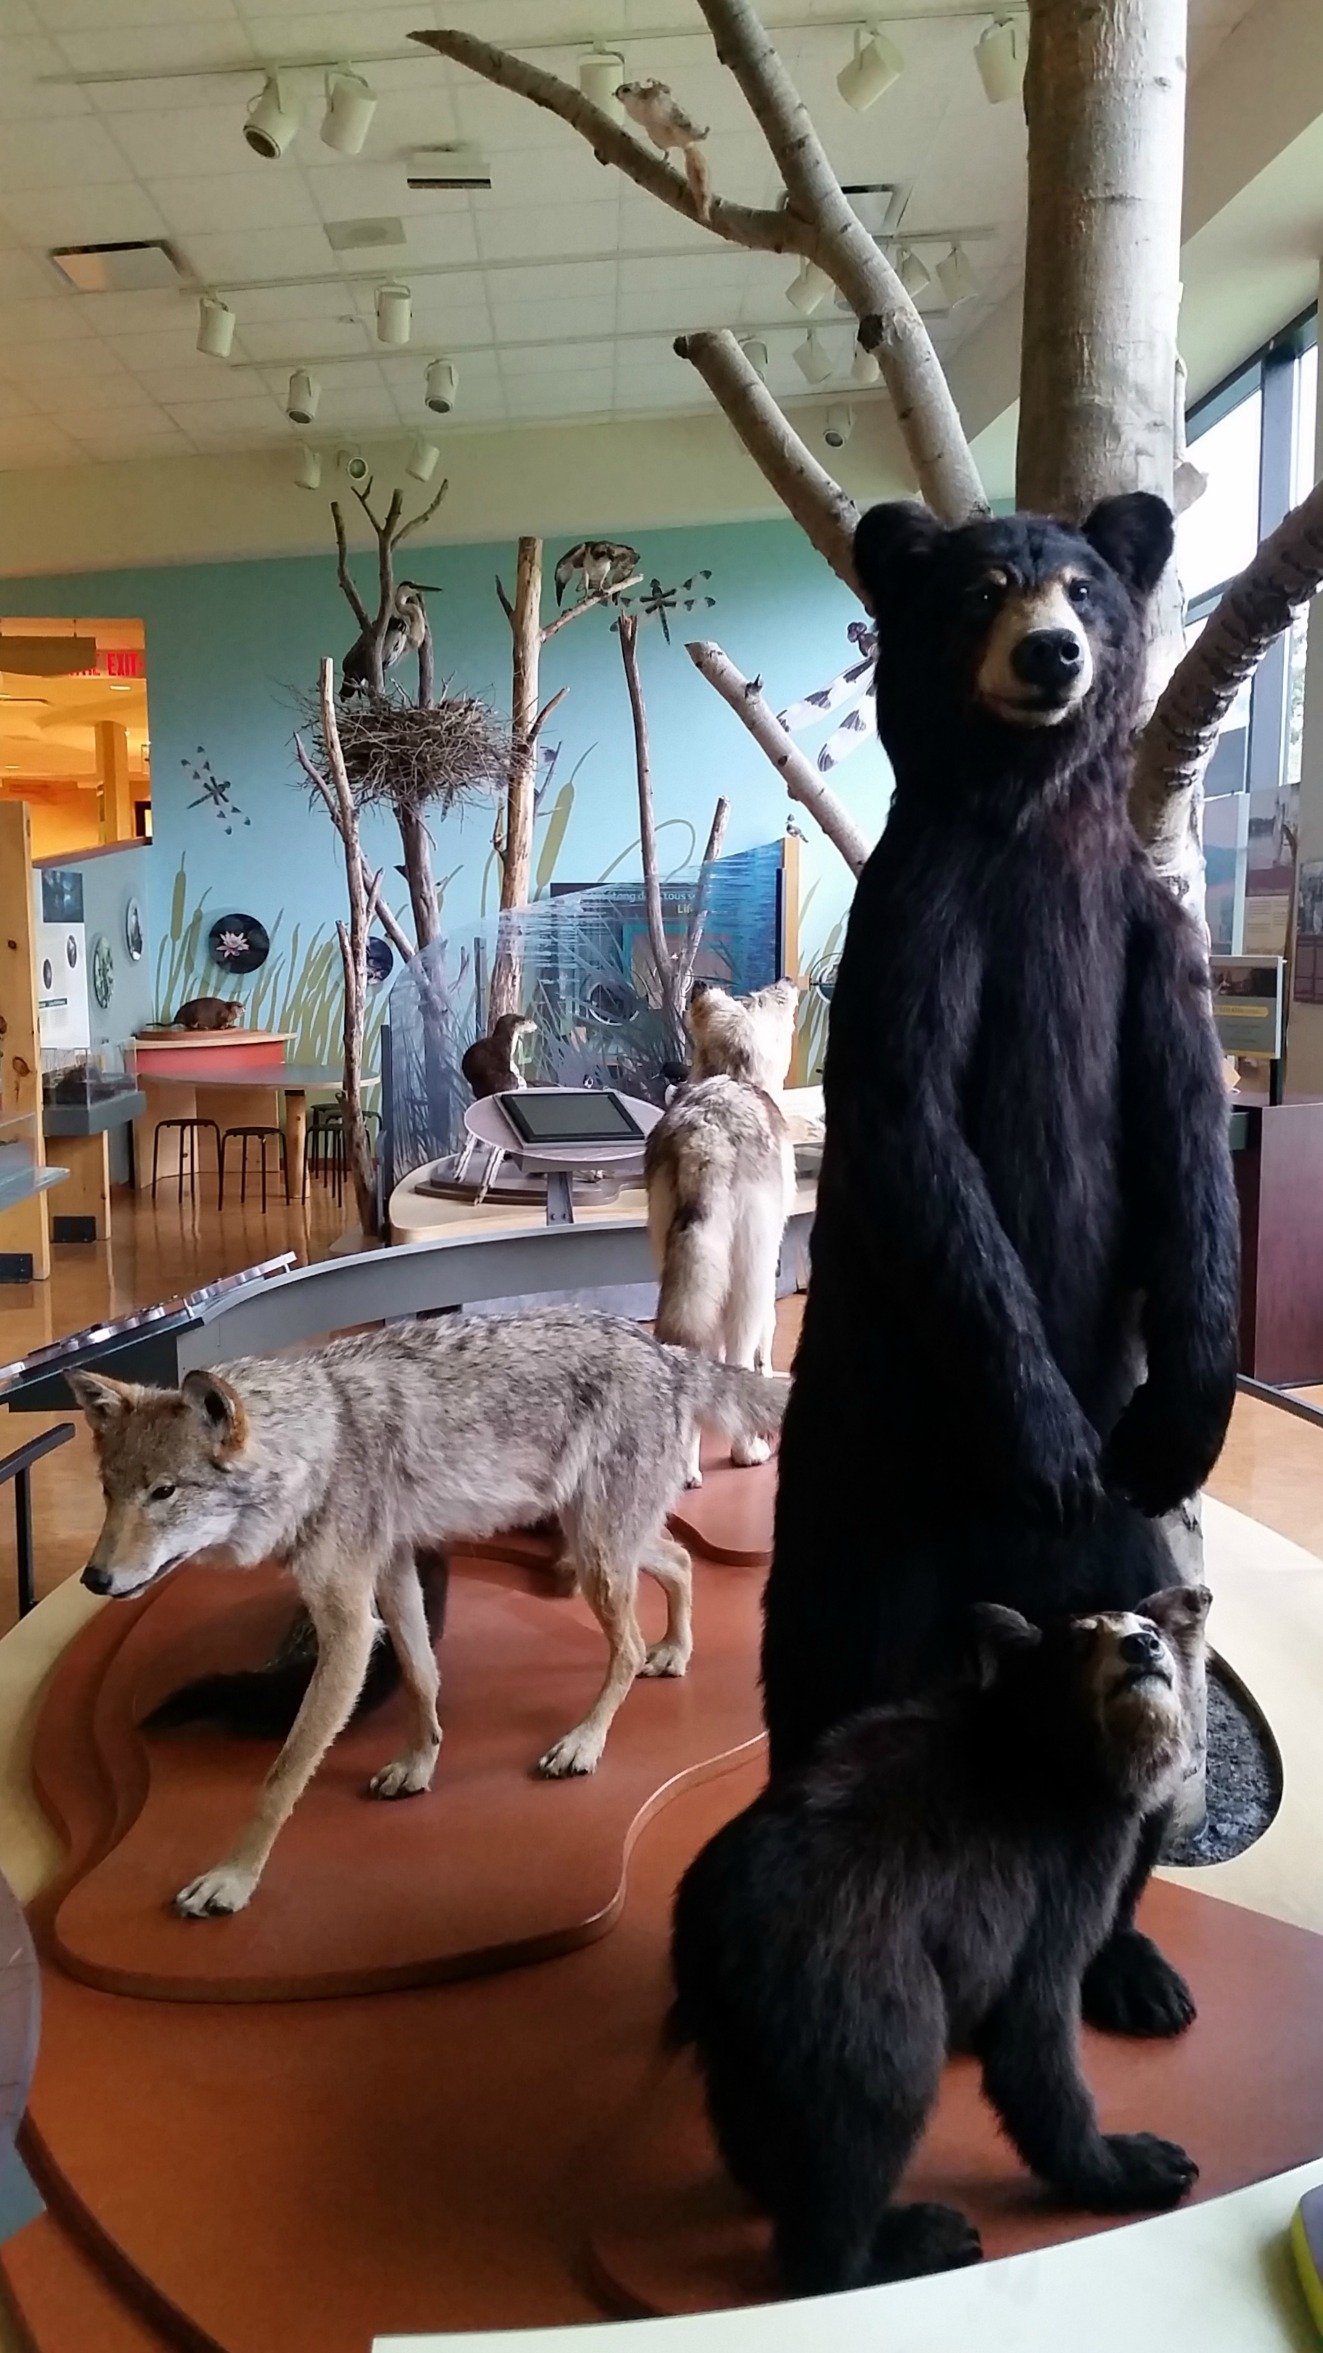 The local wildlife display in the Gatineau Park Visitor Center in Chelsea, Canada